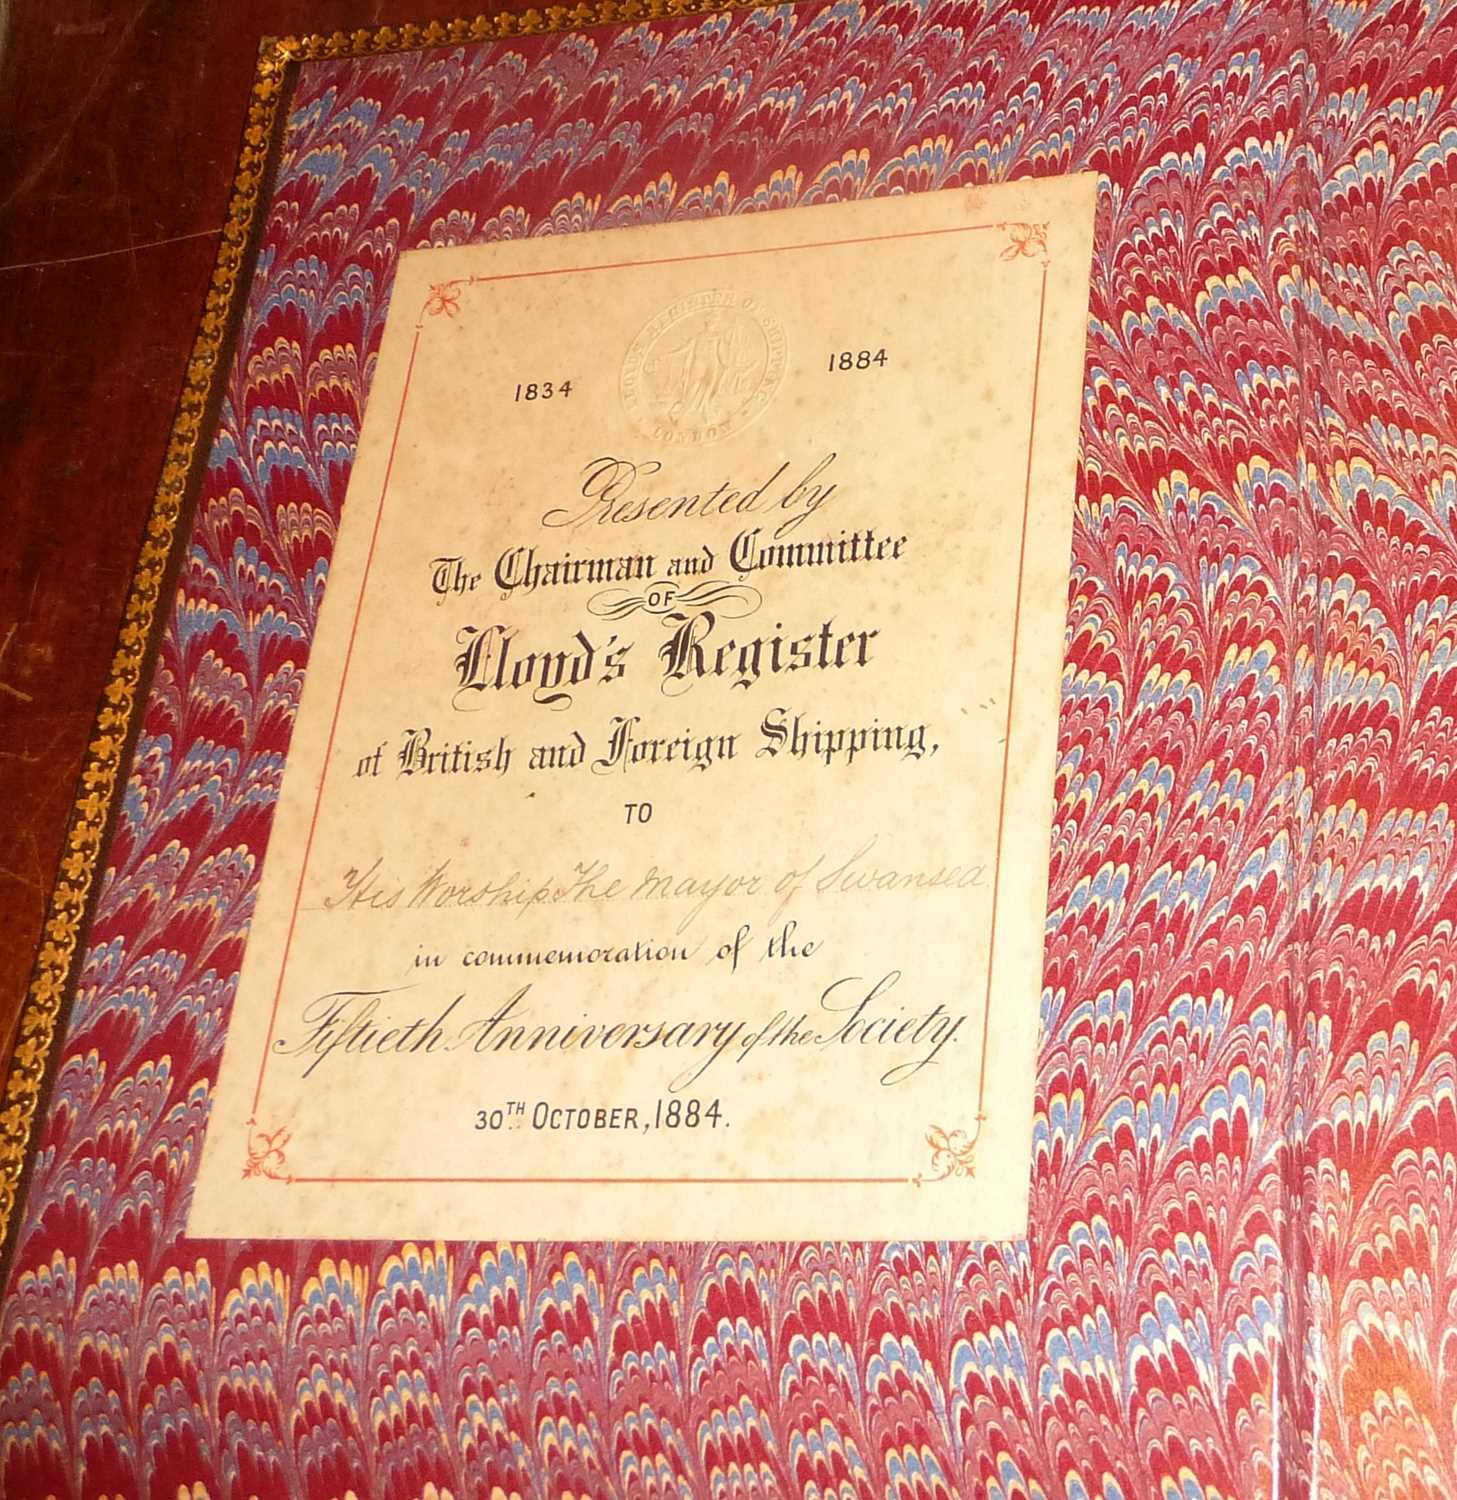 Victorian leather bound "Annals of Lloyds Register of Foreign Shipping 1834-1884", presented to - Image 2 of 4